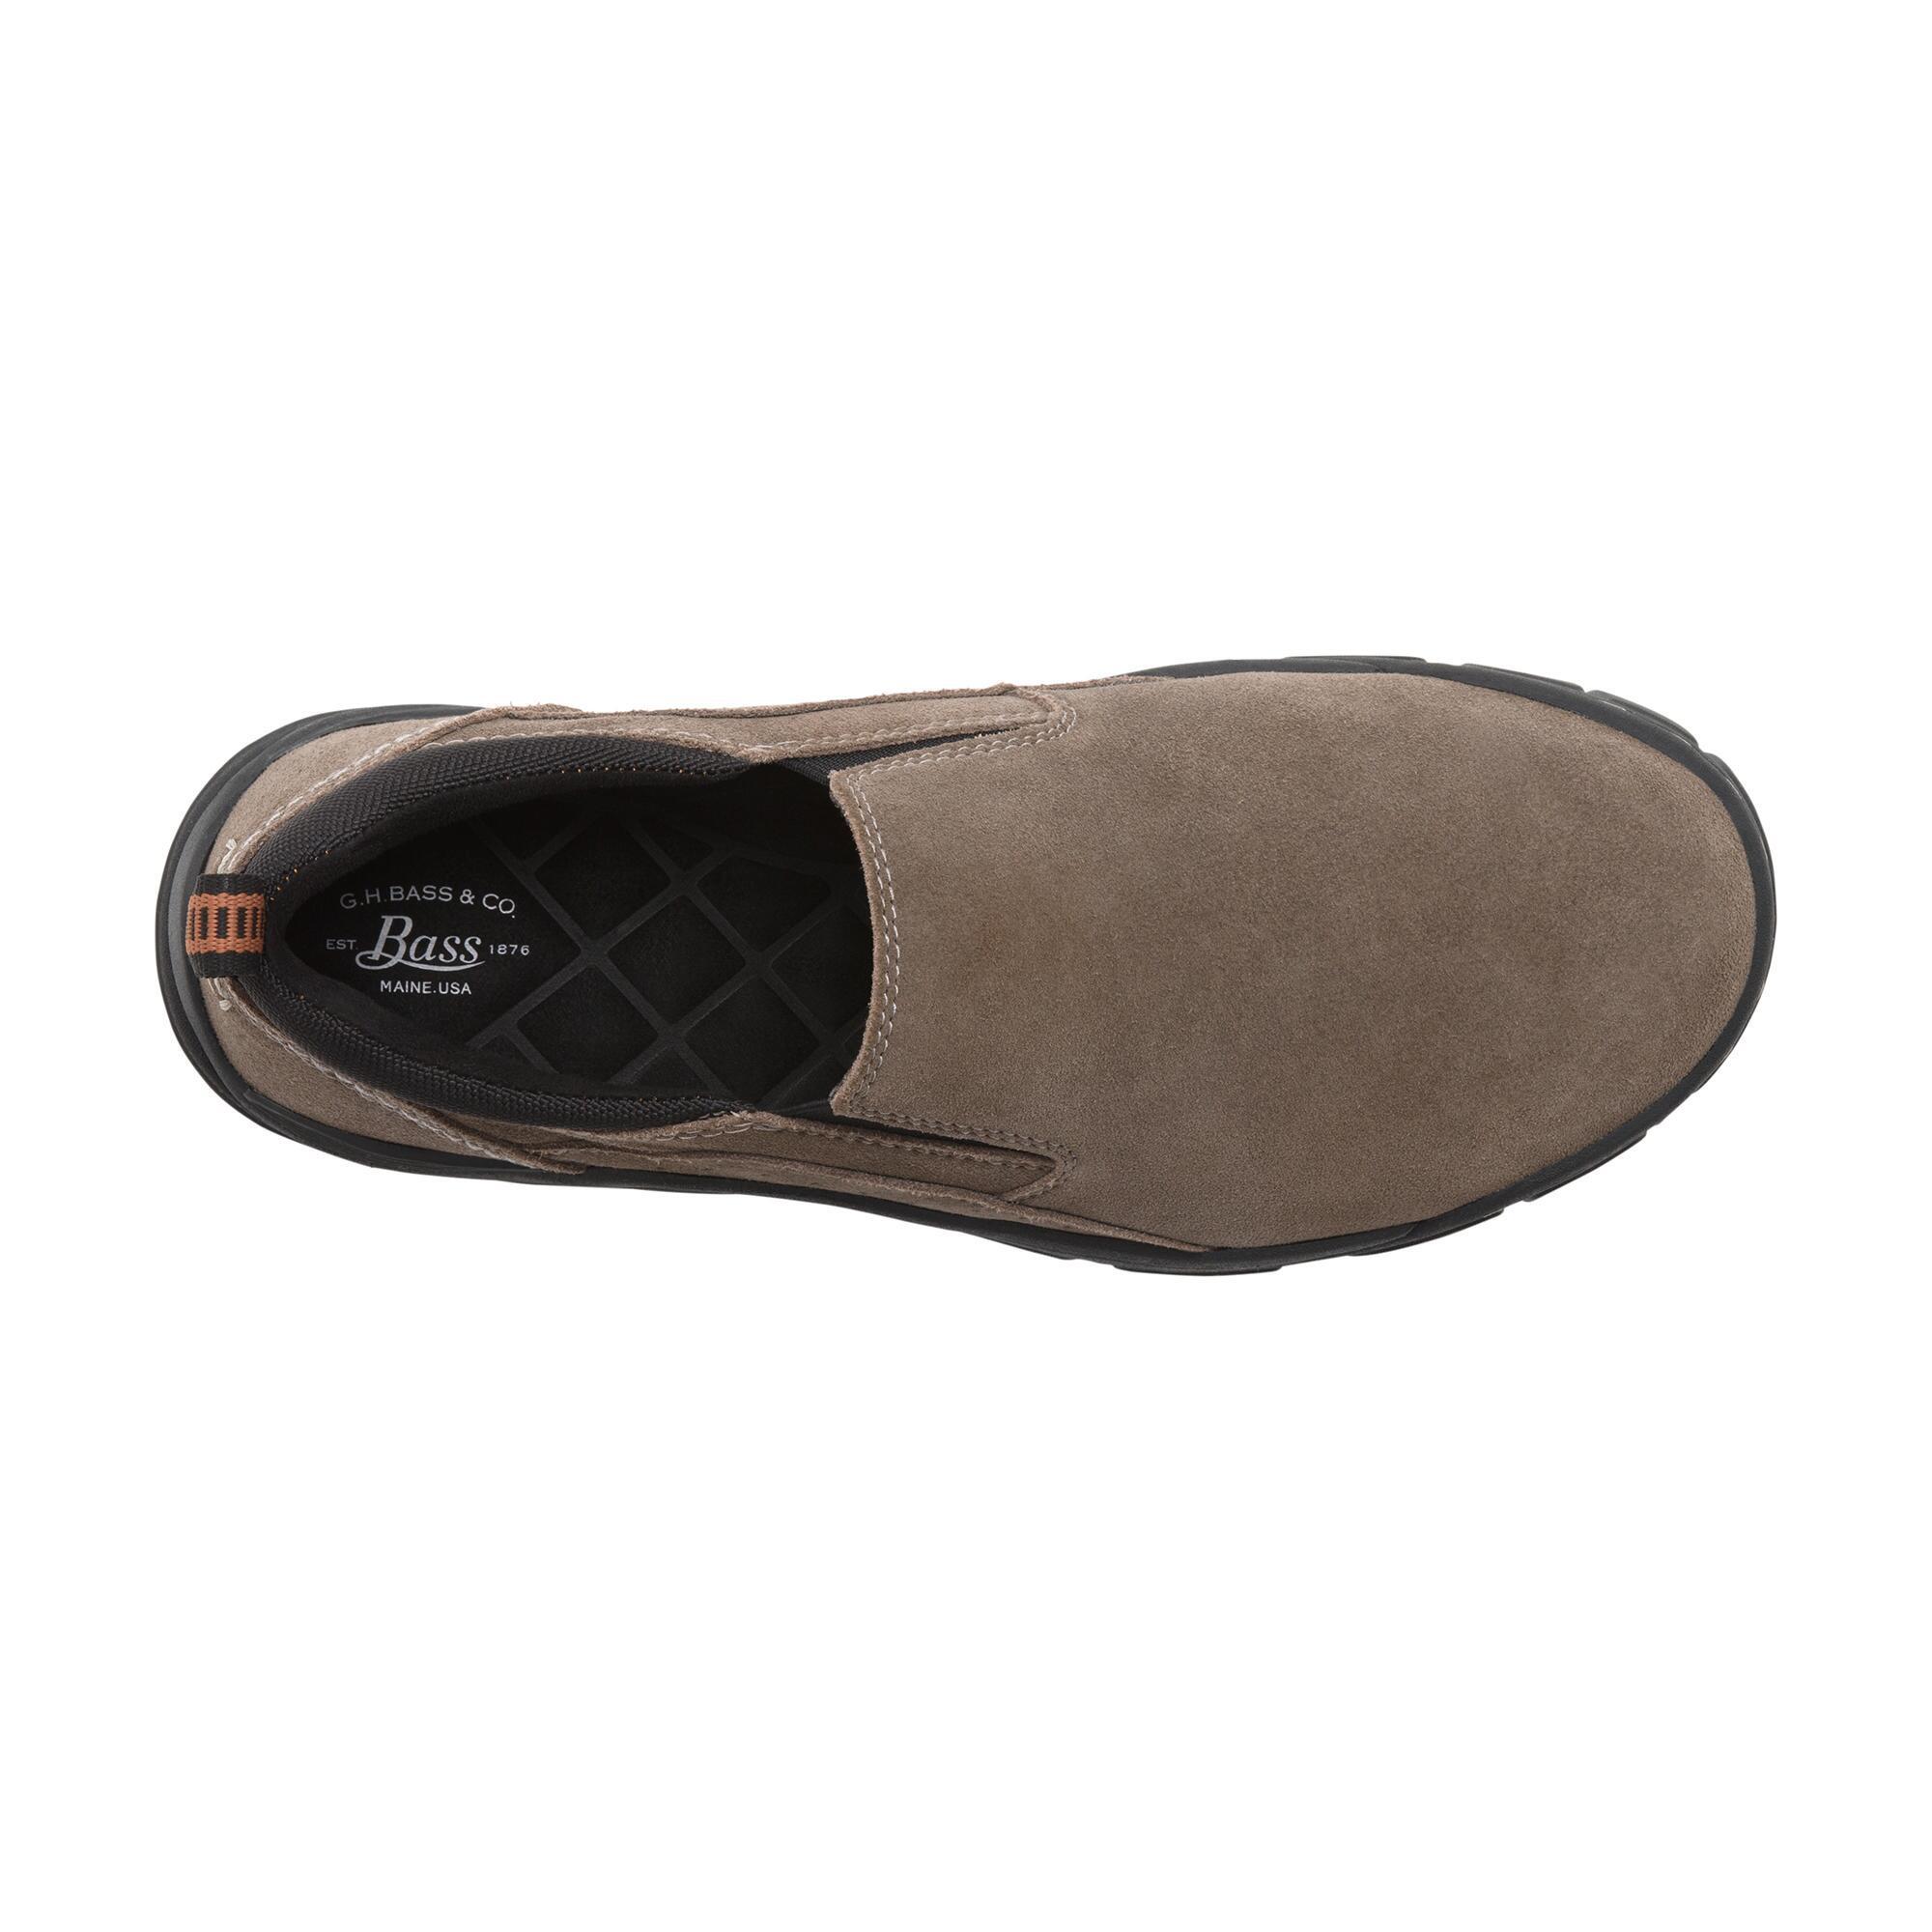 G.H.BASS Leather Garfield Slip-on in Smoke (Gray) for Men - Lyst